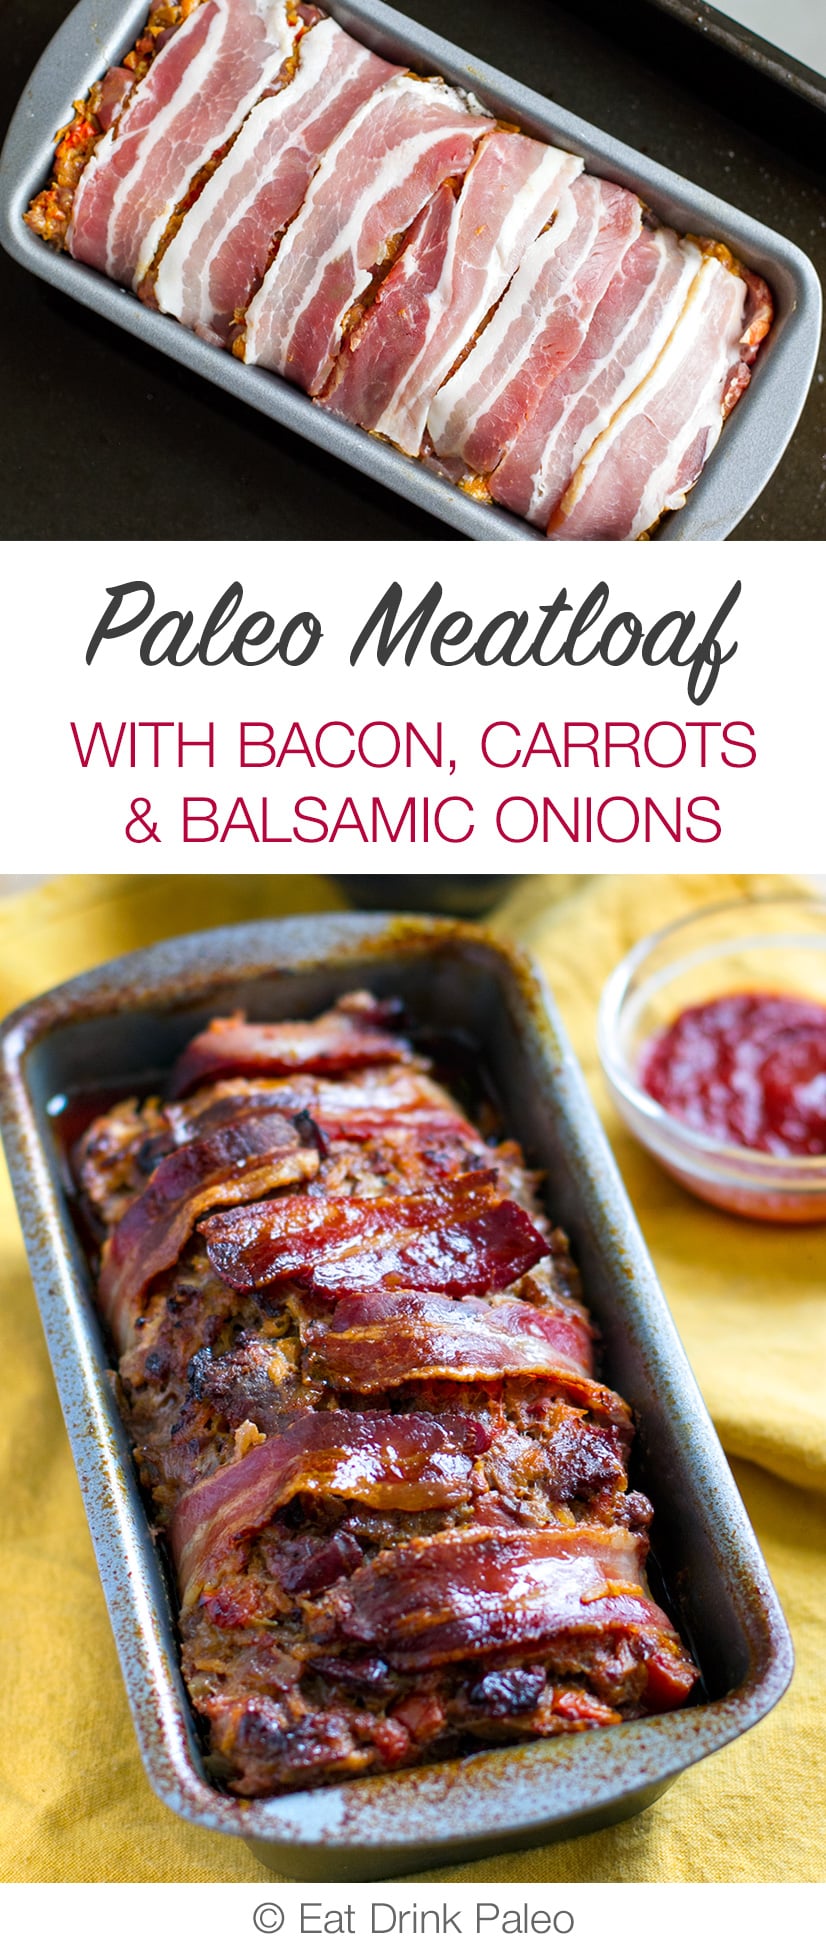 Paleo Meatloaf With Bacon, Carrots & Balsamic Onions